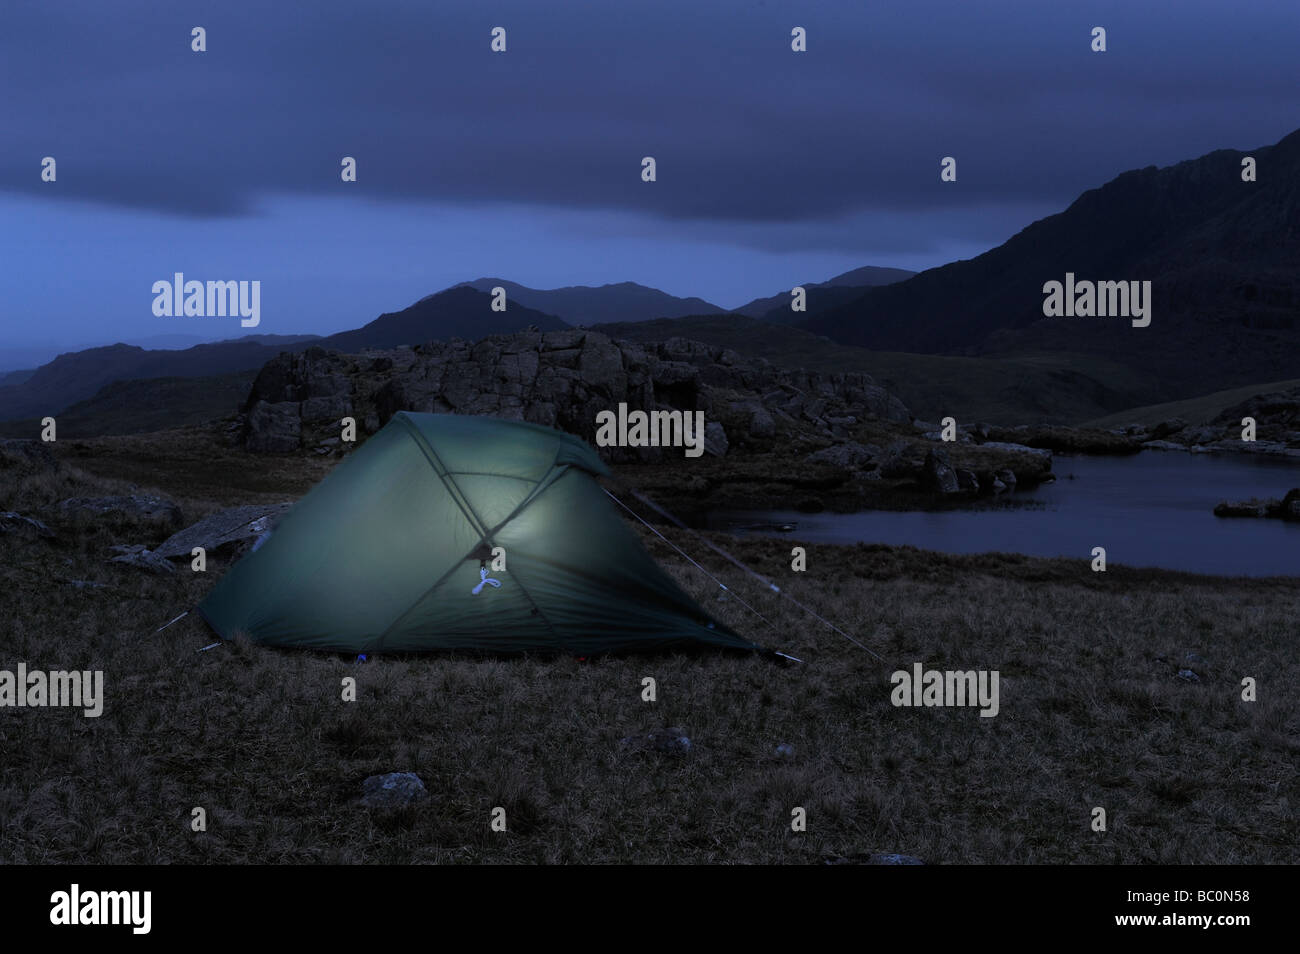 A solitary tent wild camping near a lakeland tarn in the Laked District, England, Europe Stock Photo